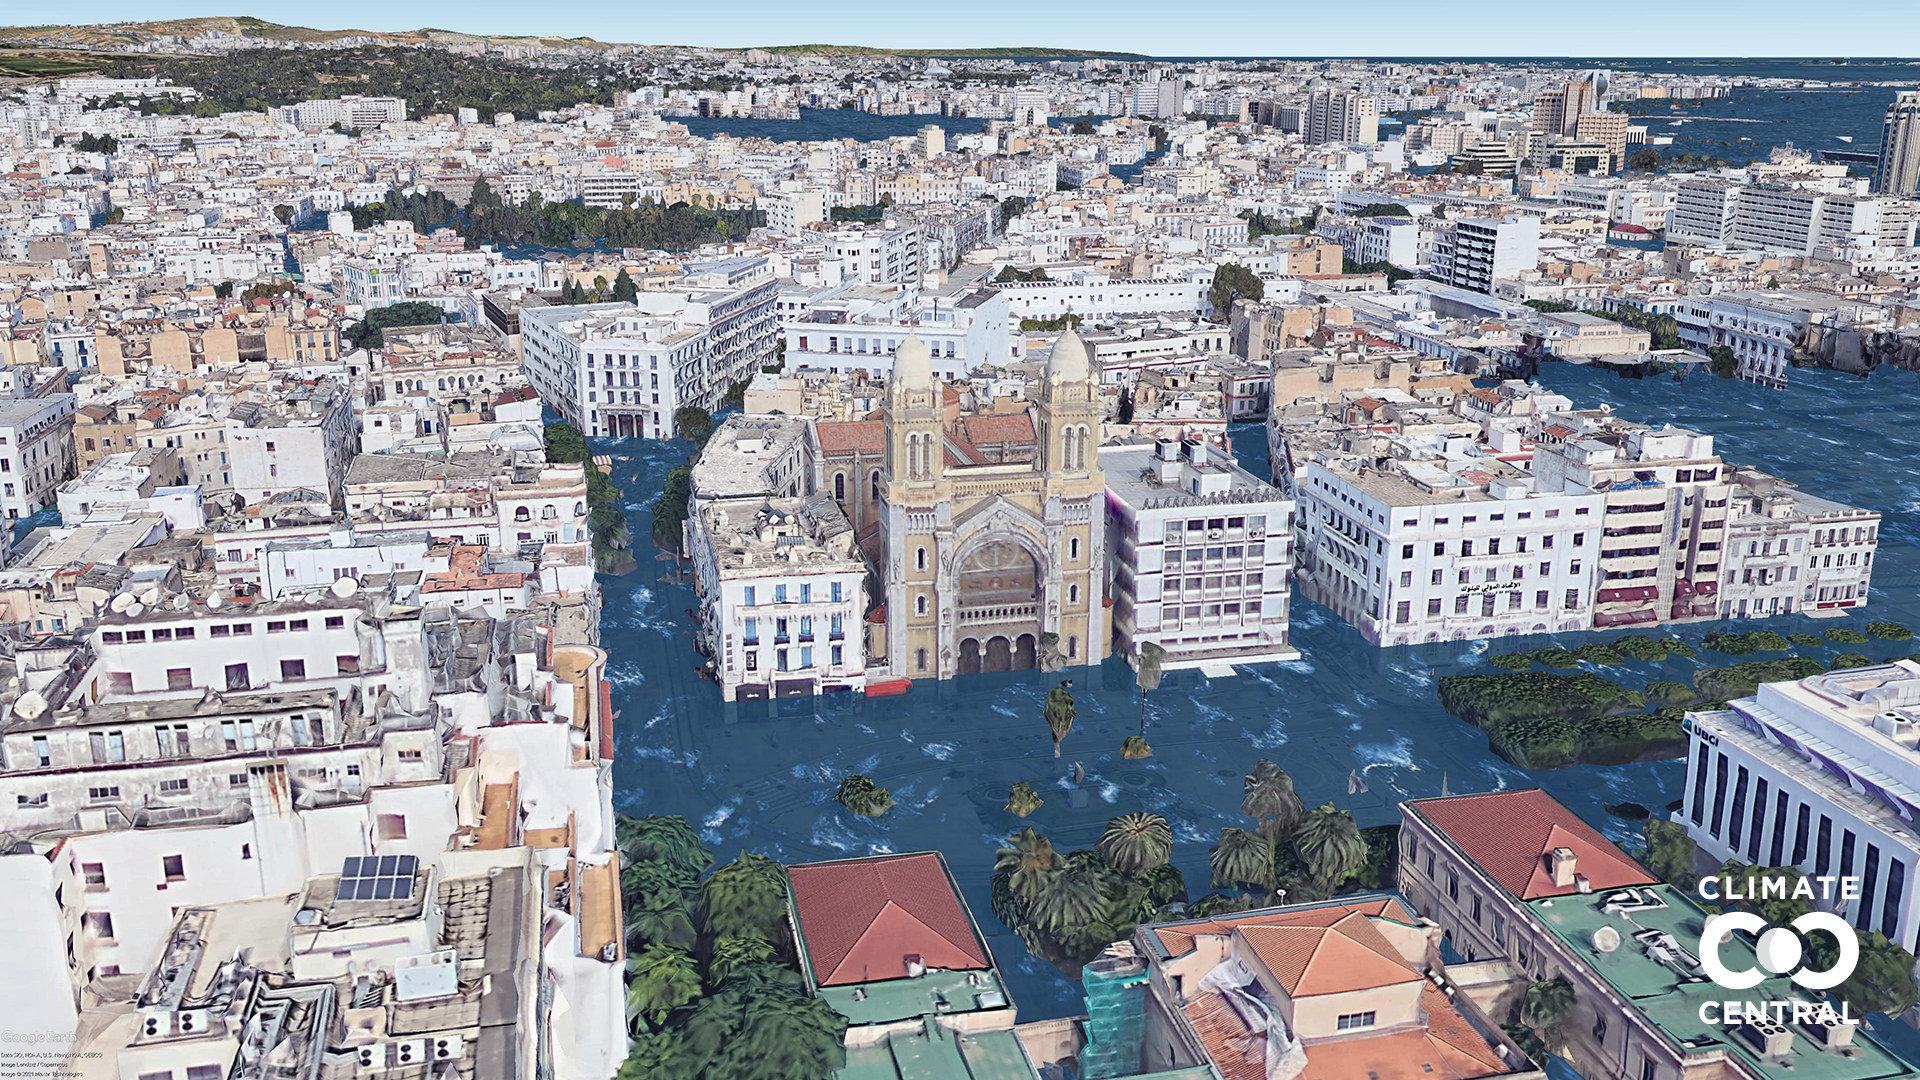 The cathedral is surrounded by water